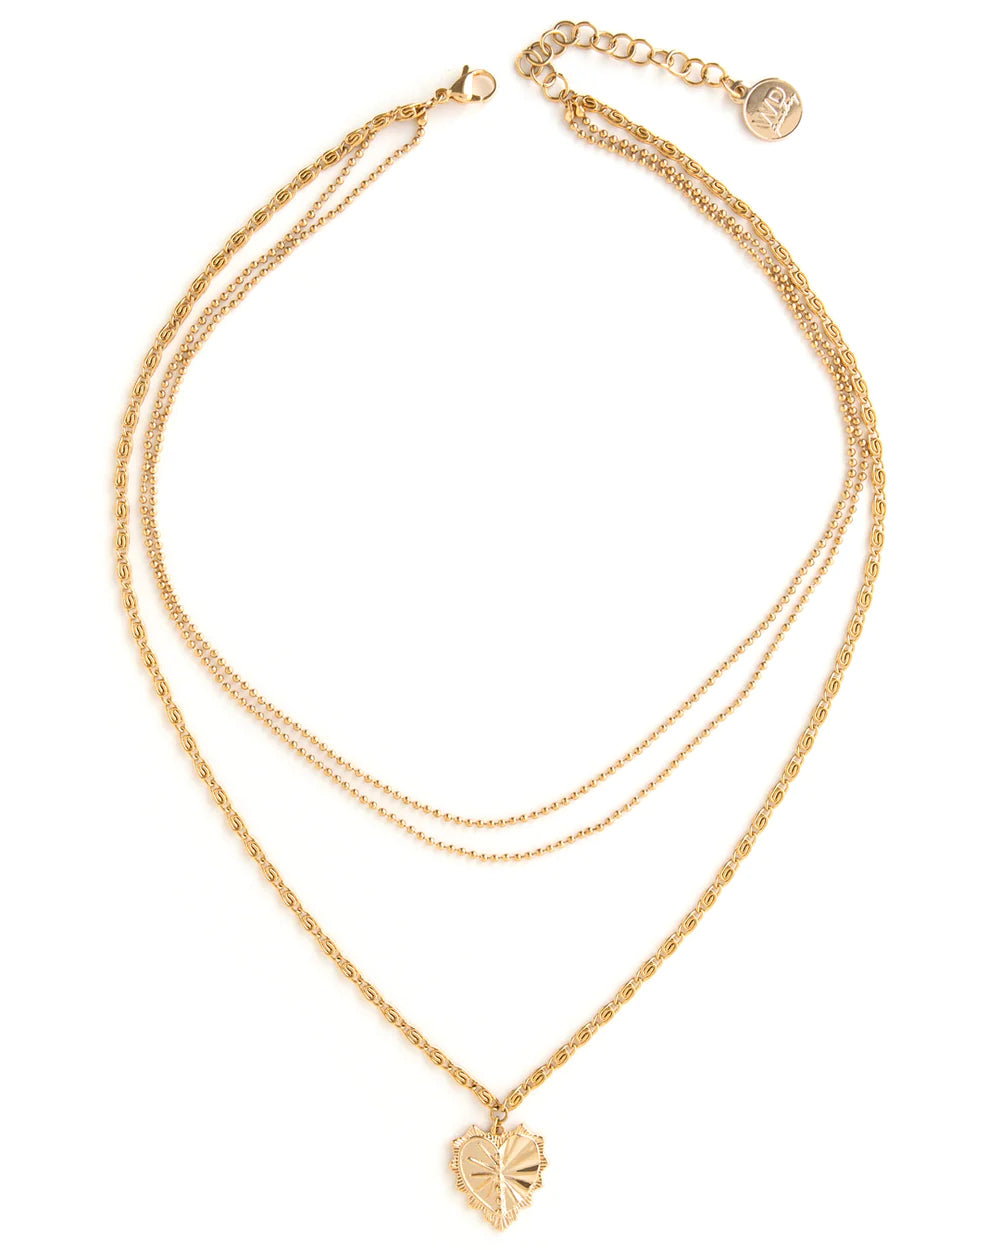 Hart Necklace - Gold